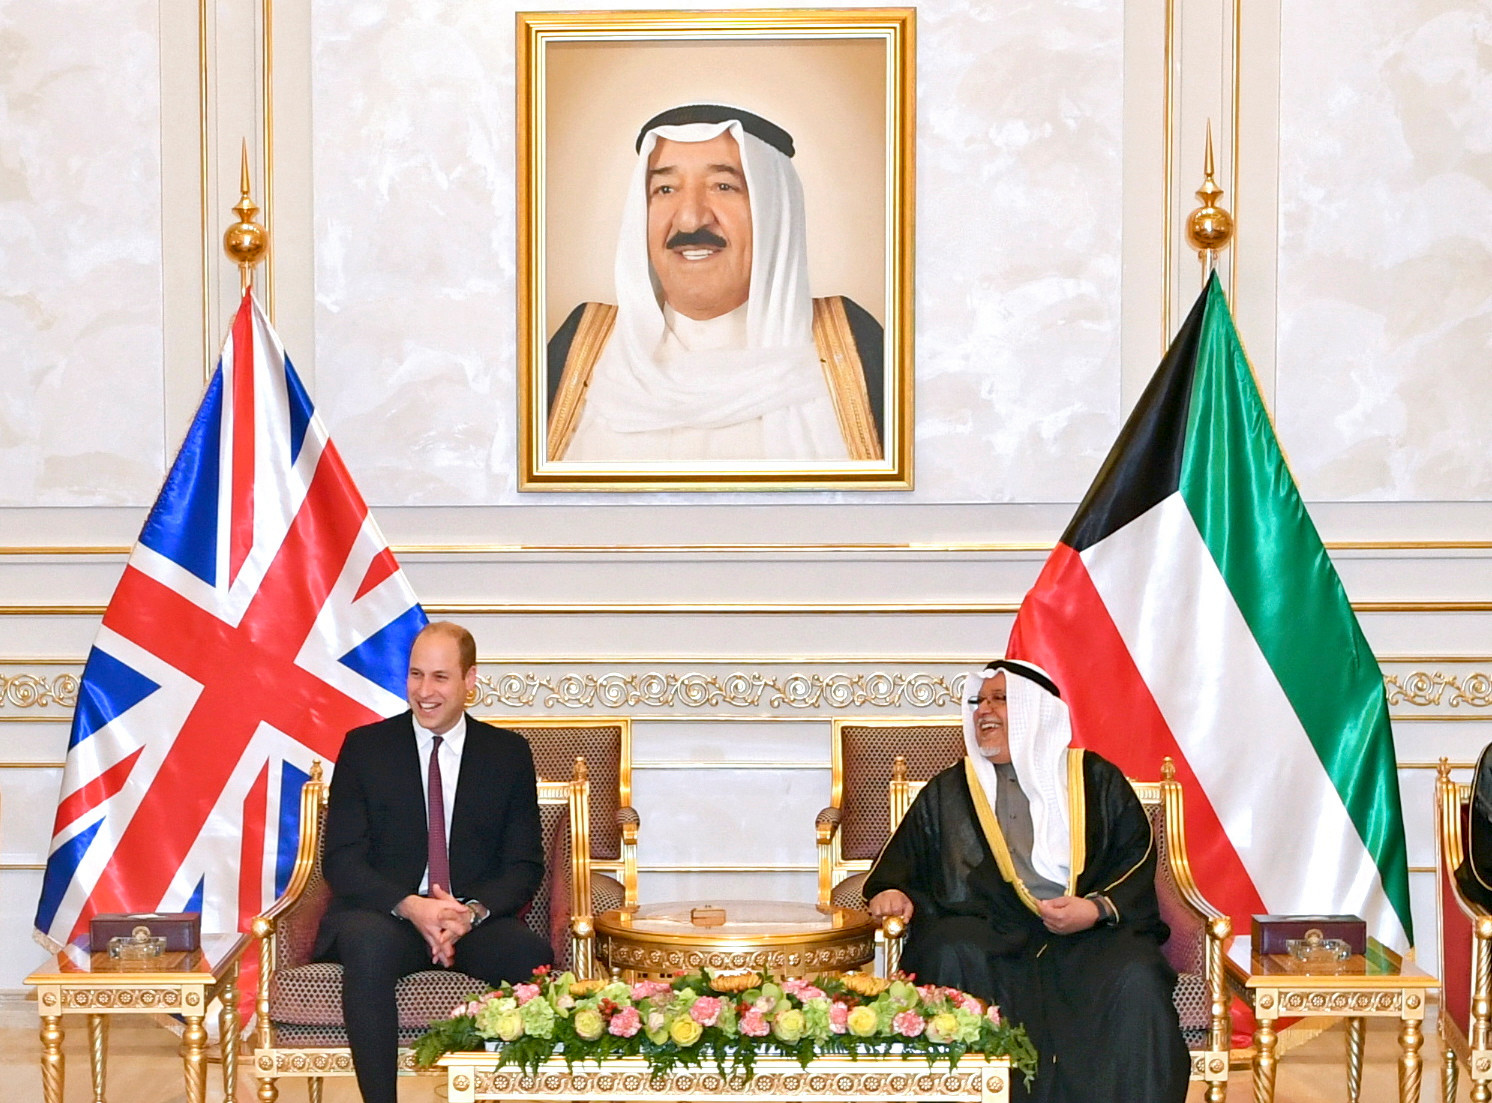 UK Prince William In Kuwait As Part Of Gulf Trip